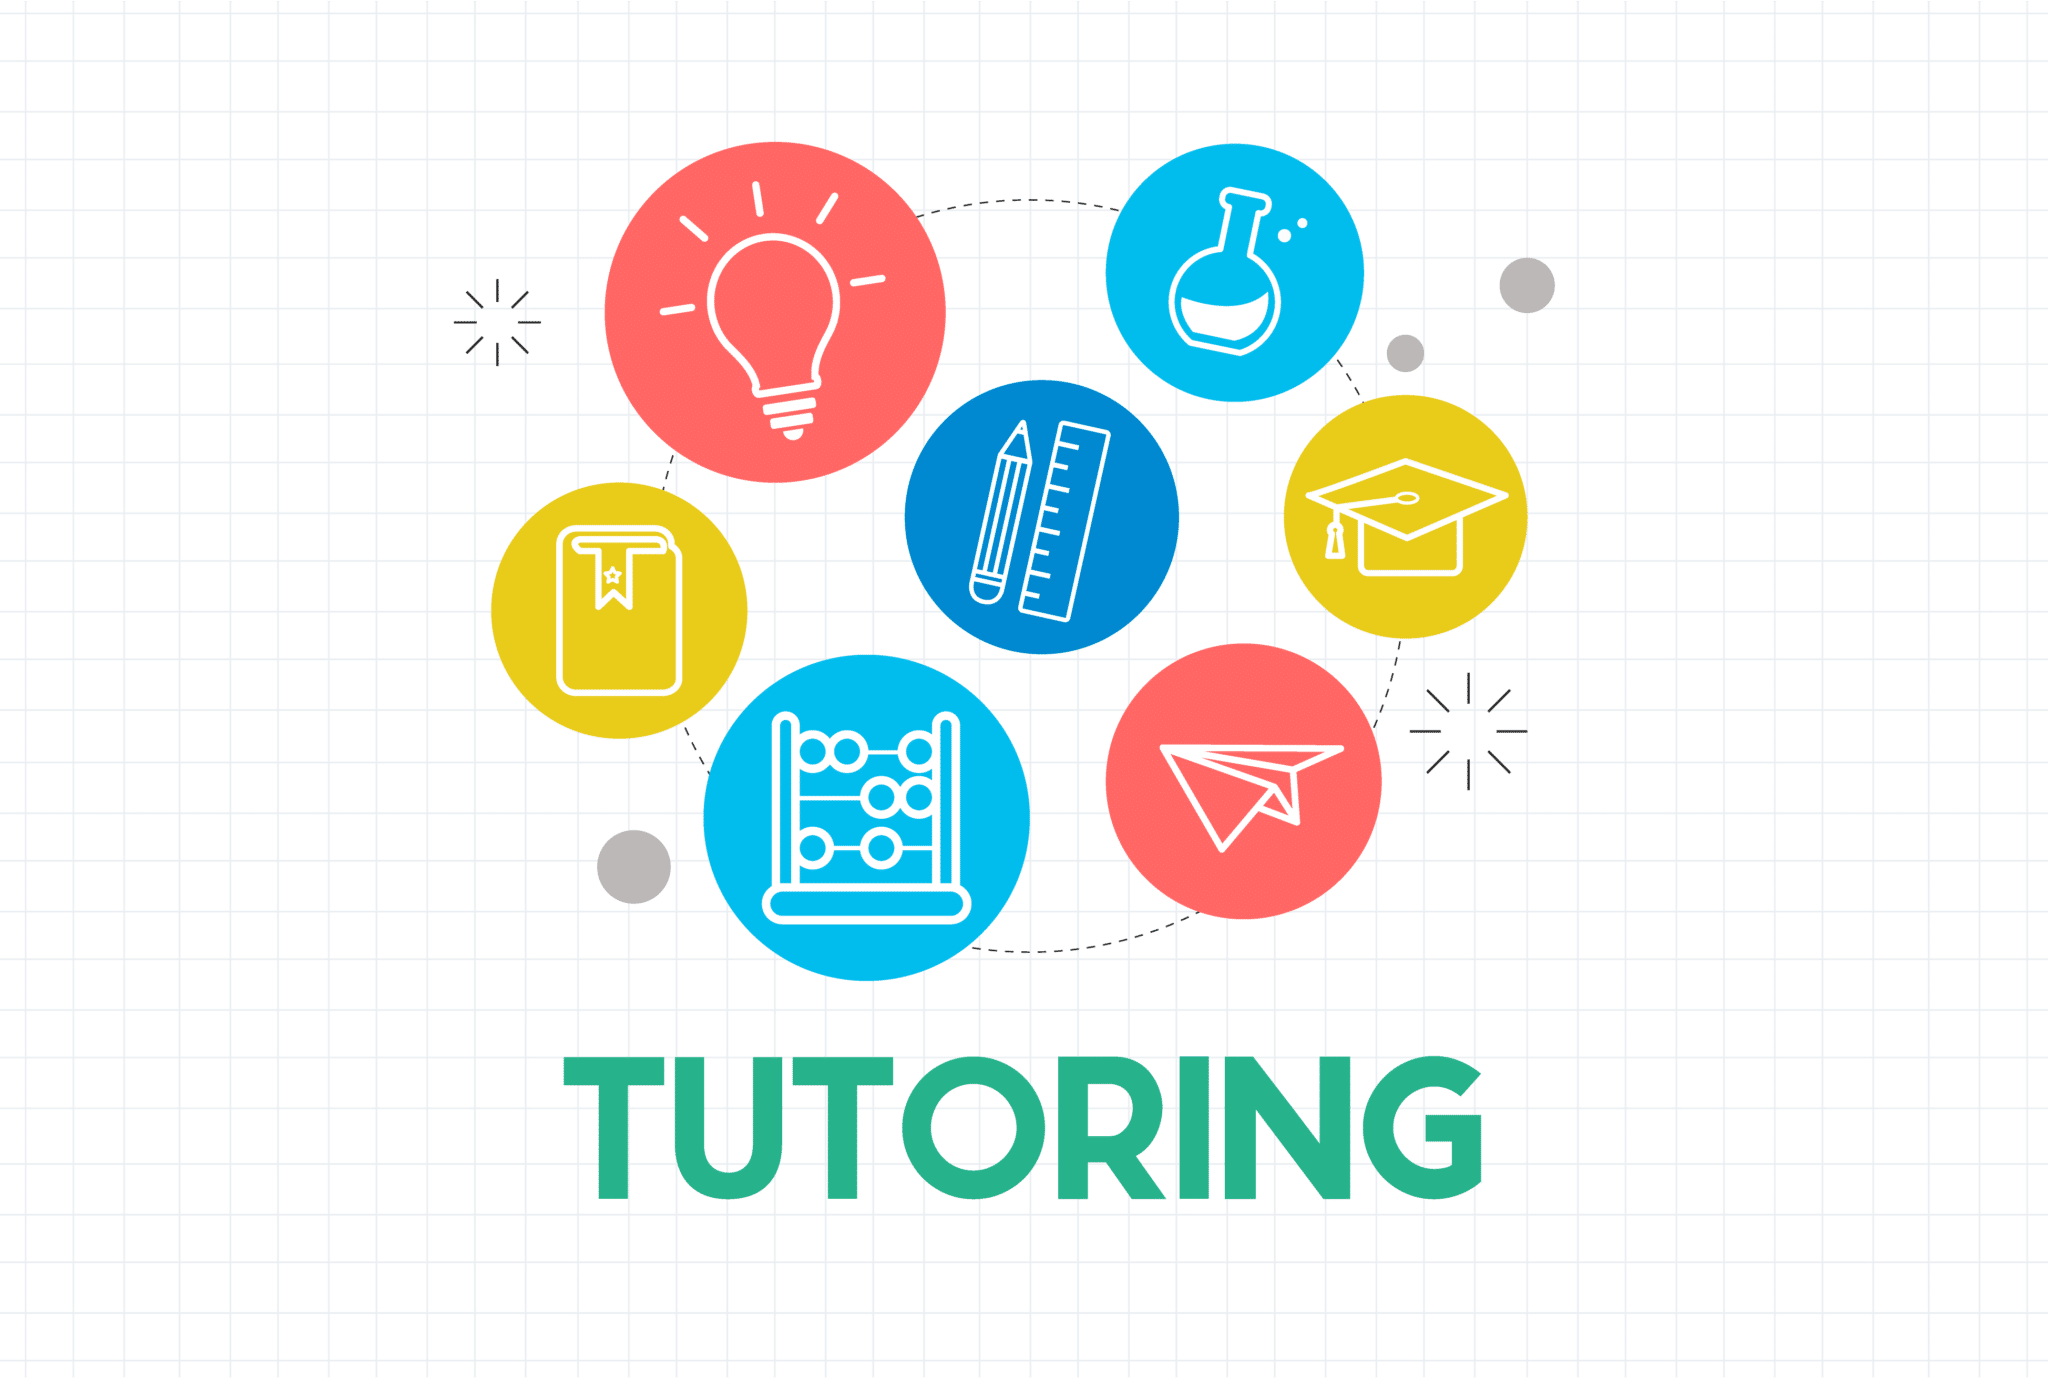 One-on-One Tutoring